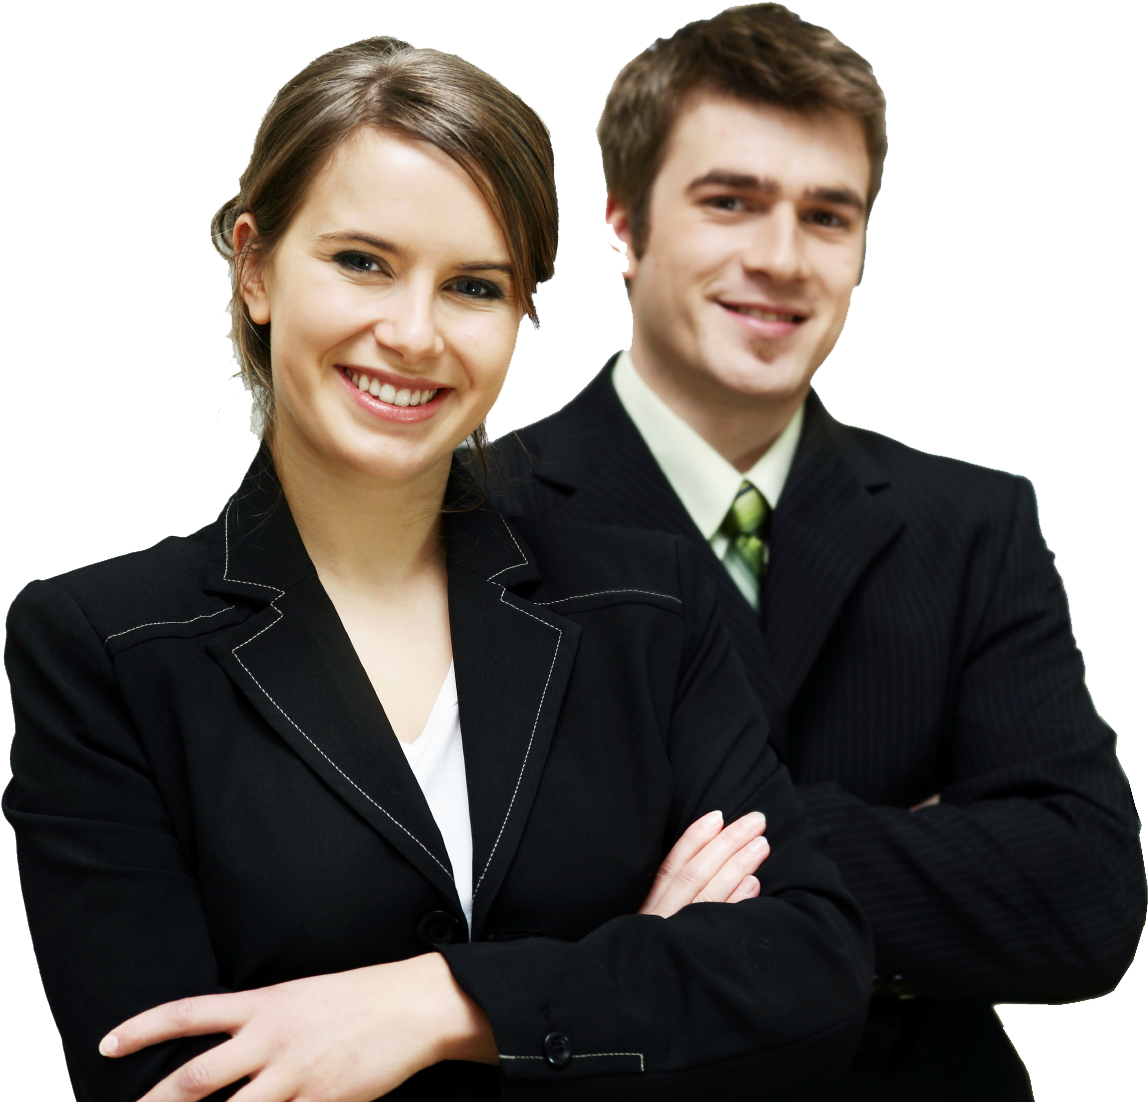 Professional Business Team Pose PNG image